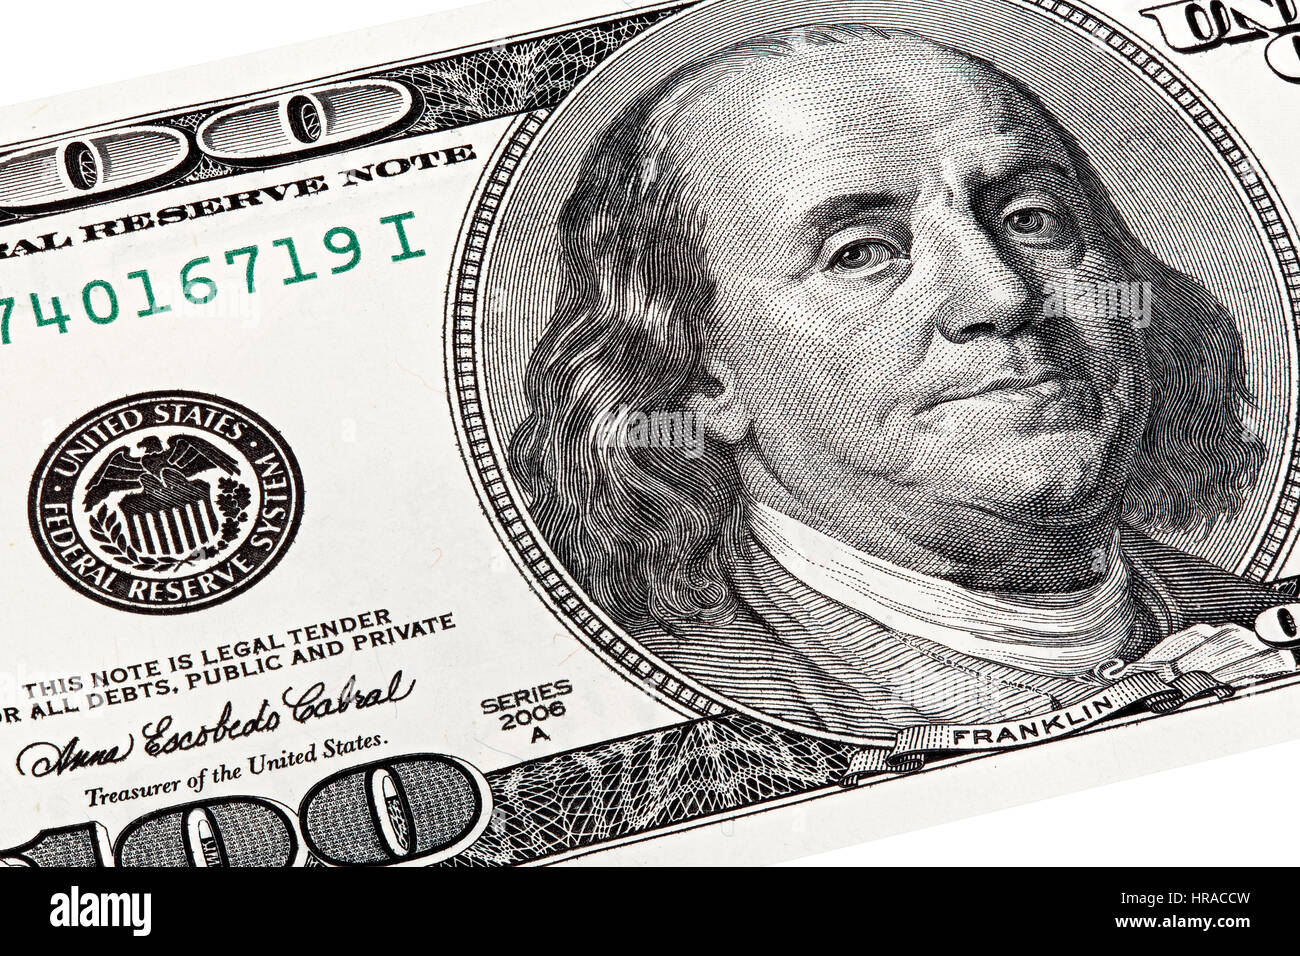 Stack shot of Benjamin Franklin portrait from a $100 bill. Stock Photo